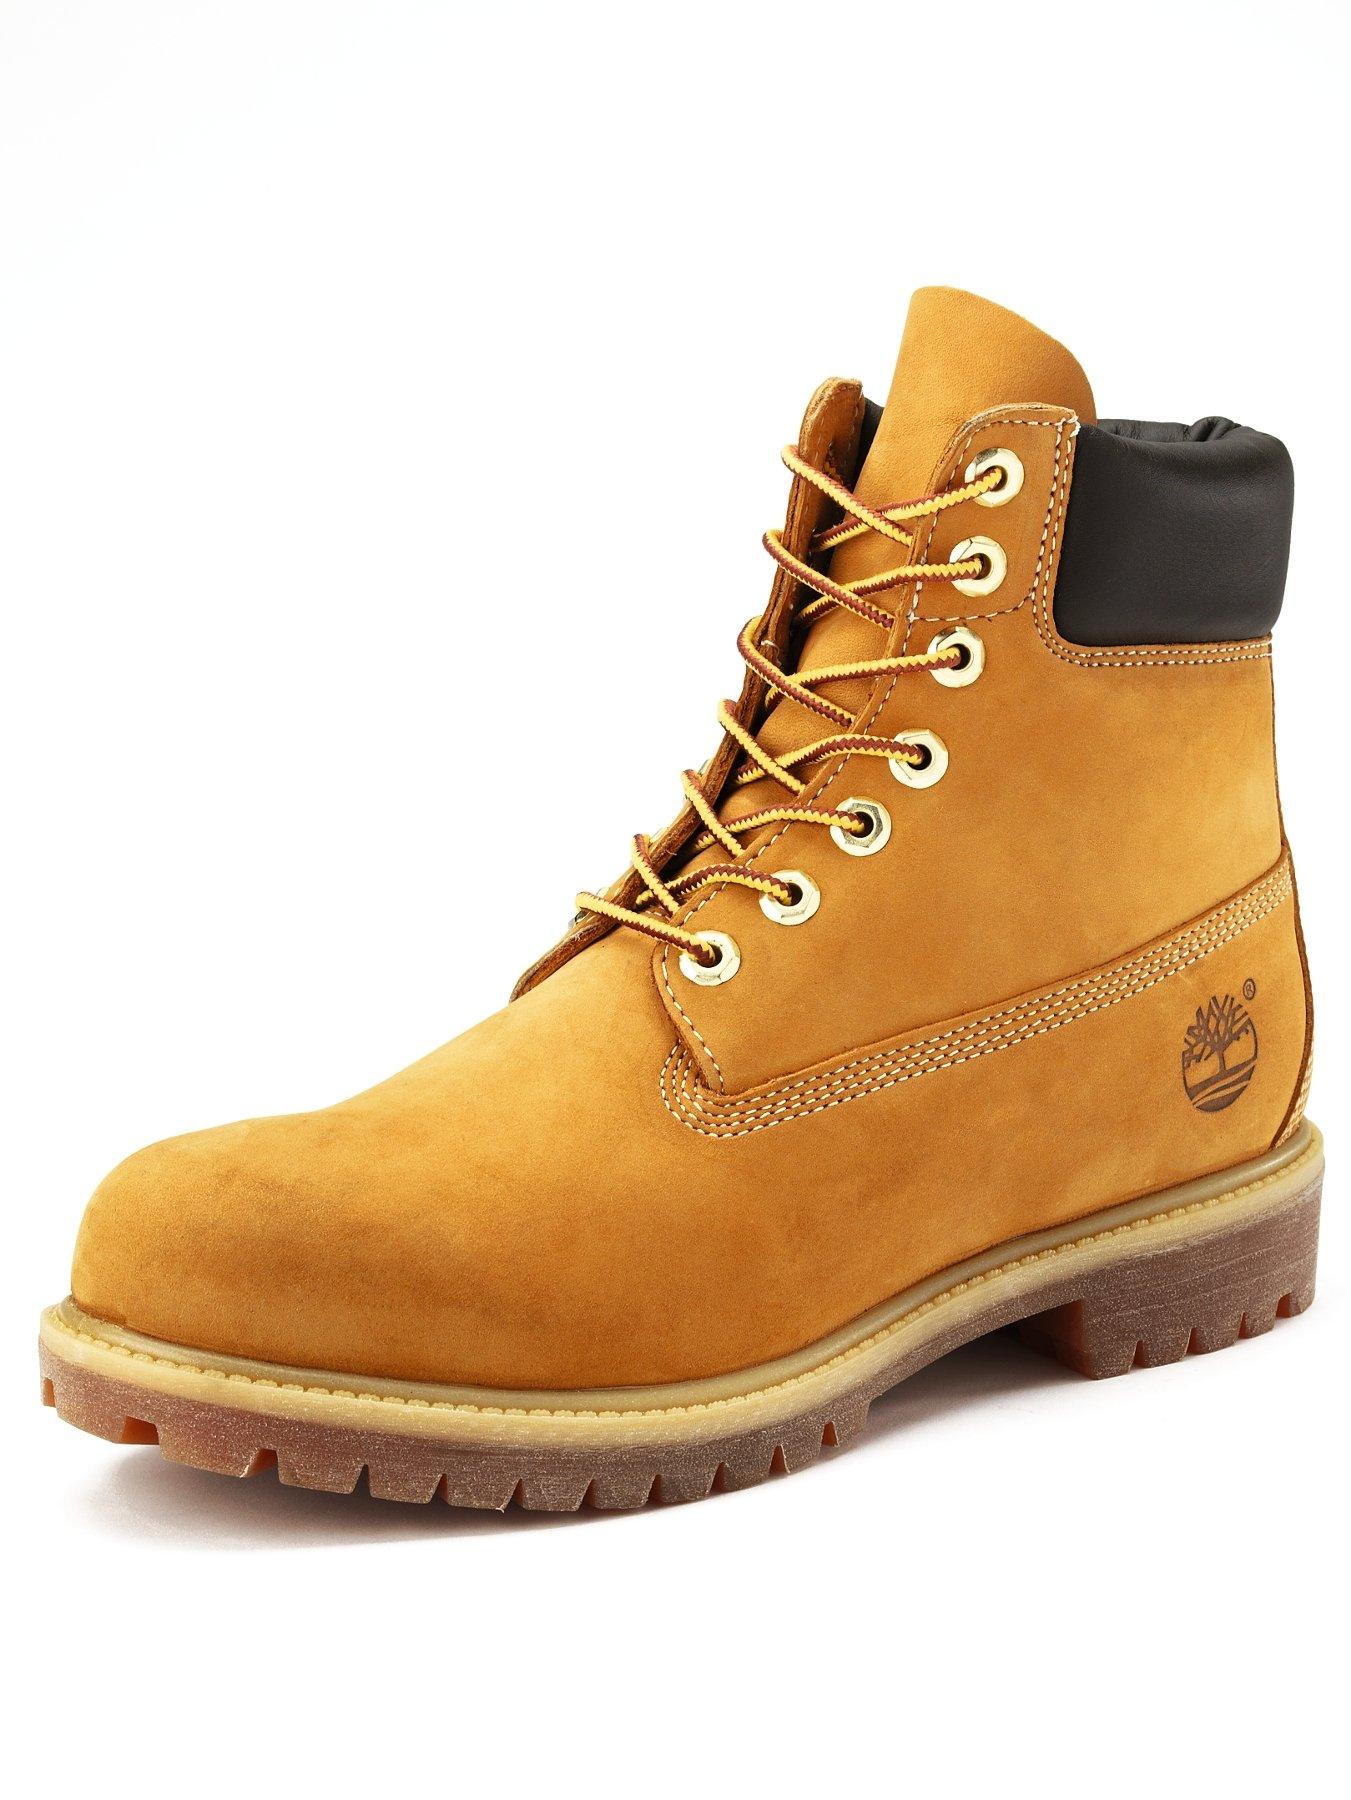 Timberland Boots & Shoes | Men's Footwear | Very